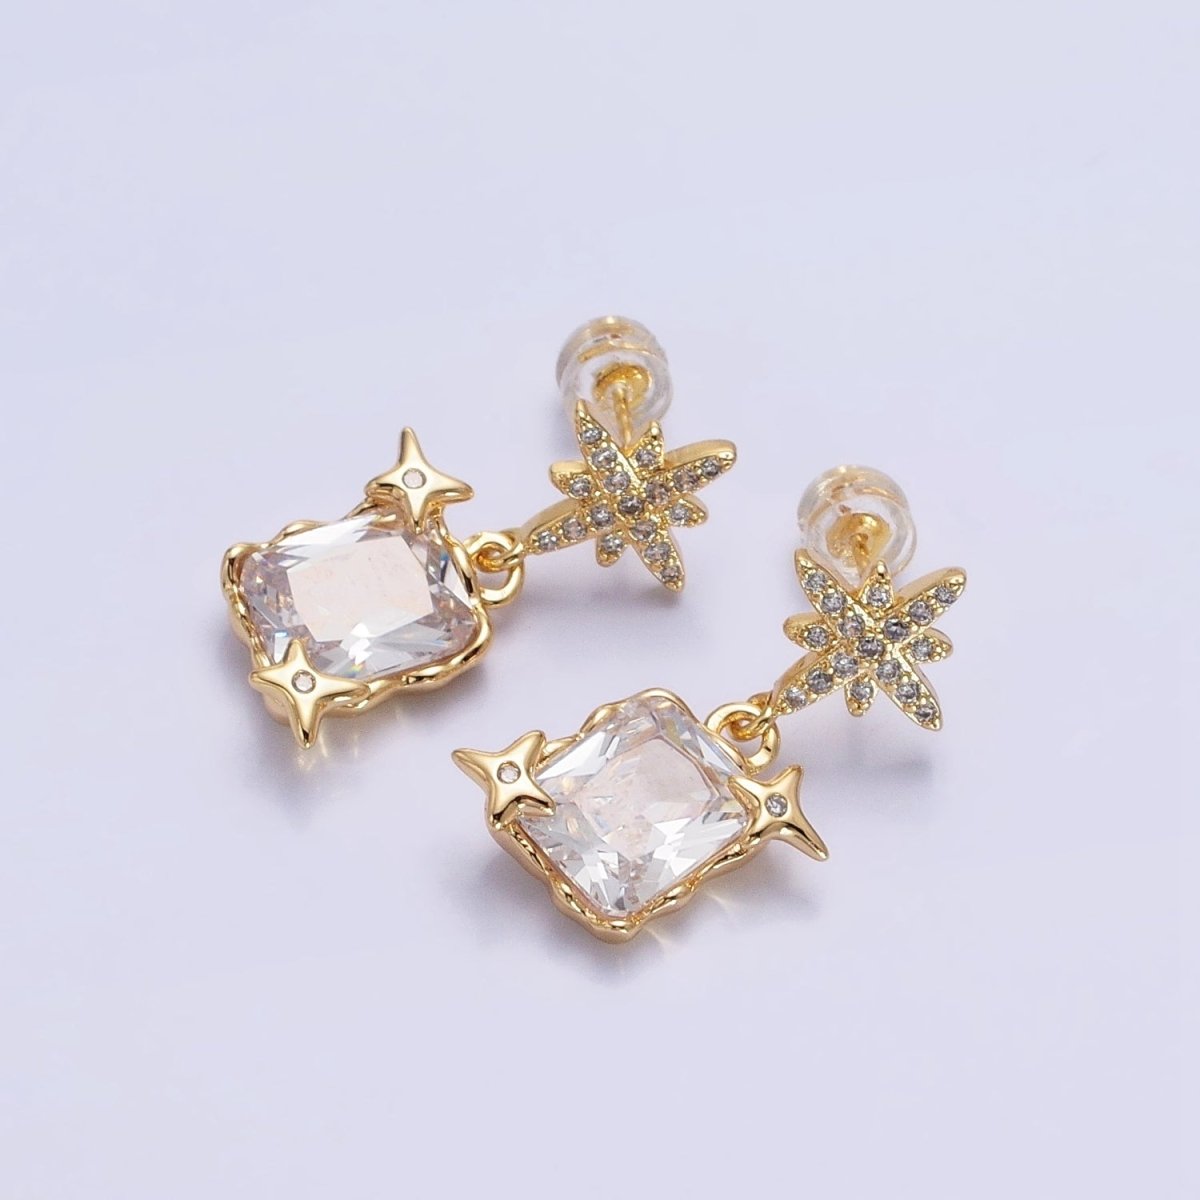 Silver, Gold Clear Baguette CZ Micro Paved Celestial North Star Stud Earrings | AB1090 AD788 - DLUXCA